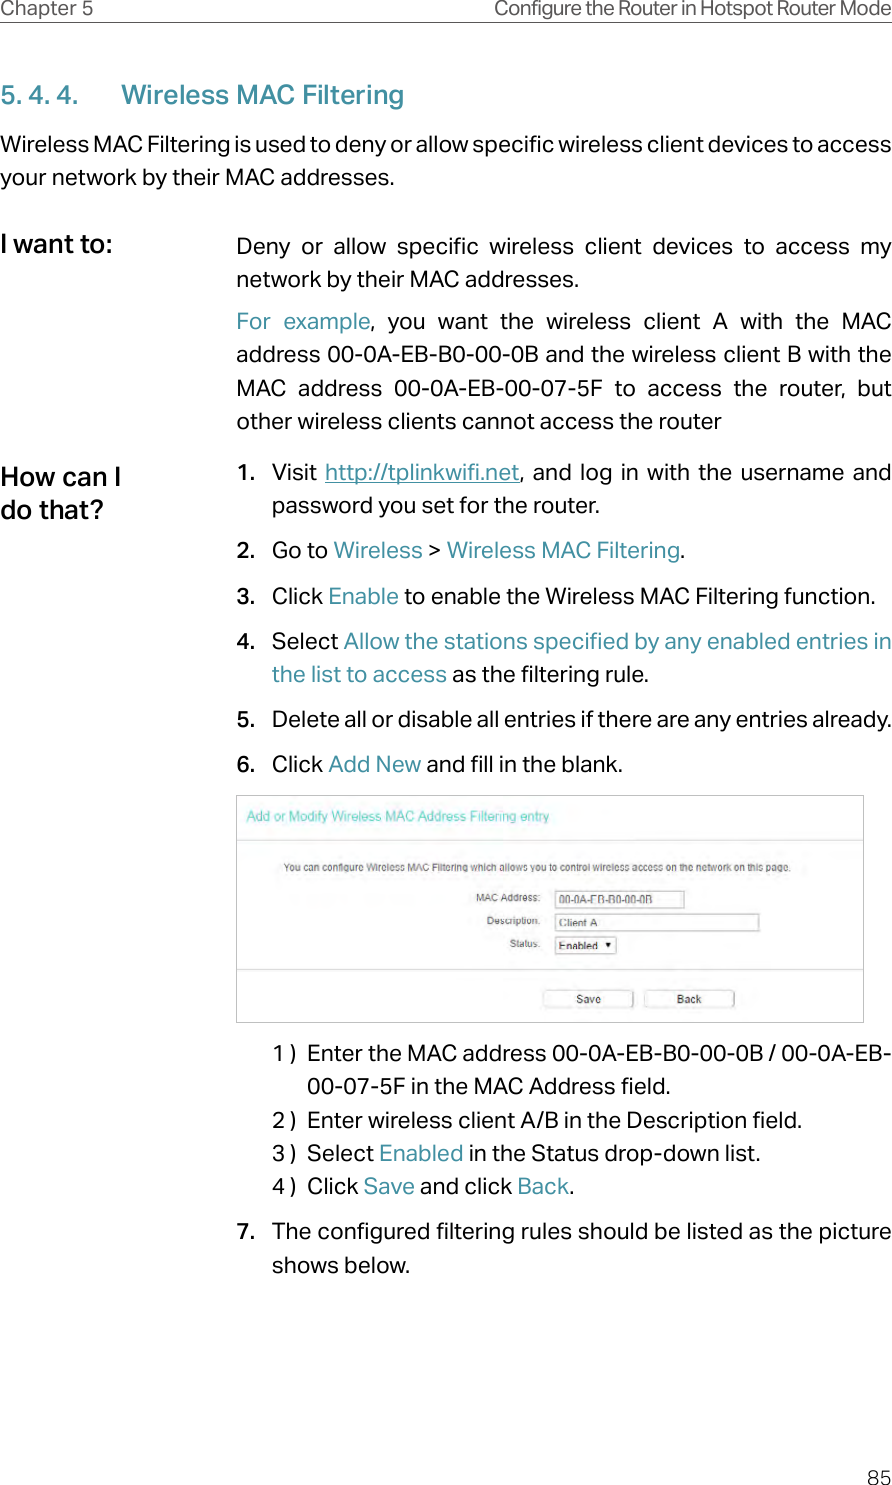 85Chapter 5 Configure the Router in Hotspot Router Mode5. 4. 4.  Wireless MAC FilteringWireless MAC Filtering is used to deny or allow specific wireless client devices to access your network by their MAC addresses.Deny or allow specific wireless client devices to access my network by their MAC addresses.For example, you want the wireless client A with the MAC address 00-0A-EB-B0-00-0B and the wireless client B with the MAC address 00-0A-EB-00-07-5F to access the router, but other wireless clients cannot access the router1.  Visit  http://tplinkwifi.net, and log in with the username and password you set for the router.2.  Go to Wireless &gt; Wireless MAC Filtering.3.  Click Enable to enable the Wireless MAC Filtering function.4.  Select Allow the stations specified by any enabled entries in the list to access as the filtering rule.5.  Delete all or disable all entries if there are any entries already.6.  Click Add New and fill in the blank.1 )  Enter the MAC address 00-0A-EB-B0-00-0B / 00-0A-EB-00-07-5F in the MAC Address field.2 )  Enter wireless client A/B in the Description field.3 )  Select Enabled in the Status drop-down list.4 )  Click Save and click Back.7.  The configured filtering rules should be listed as the picture shows below.I want to:How can I do that?